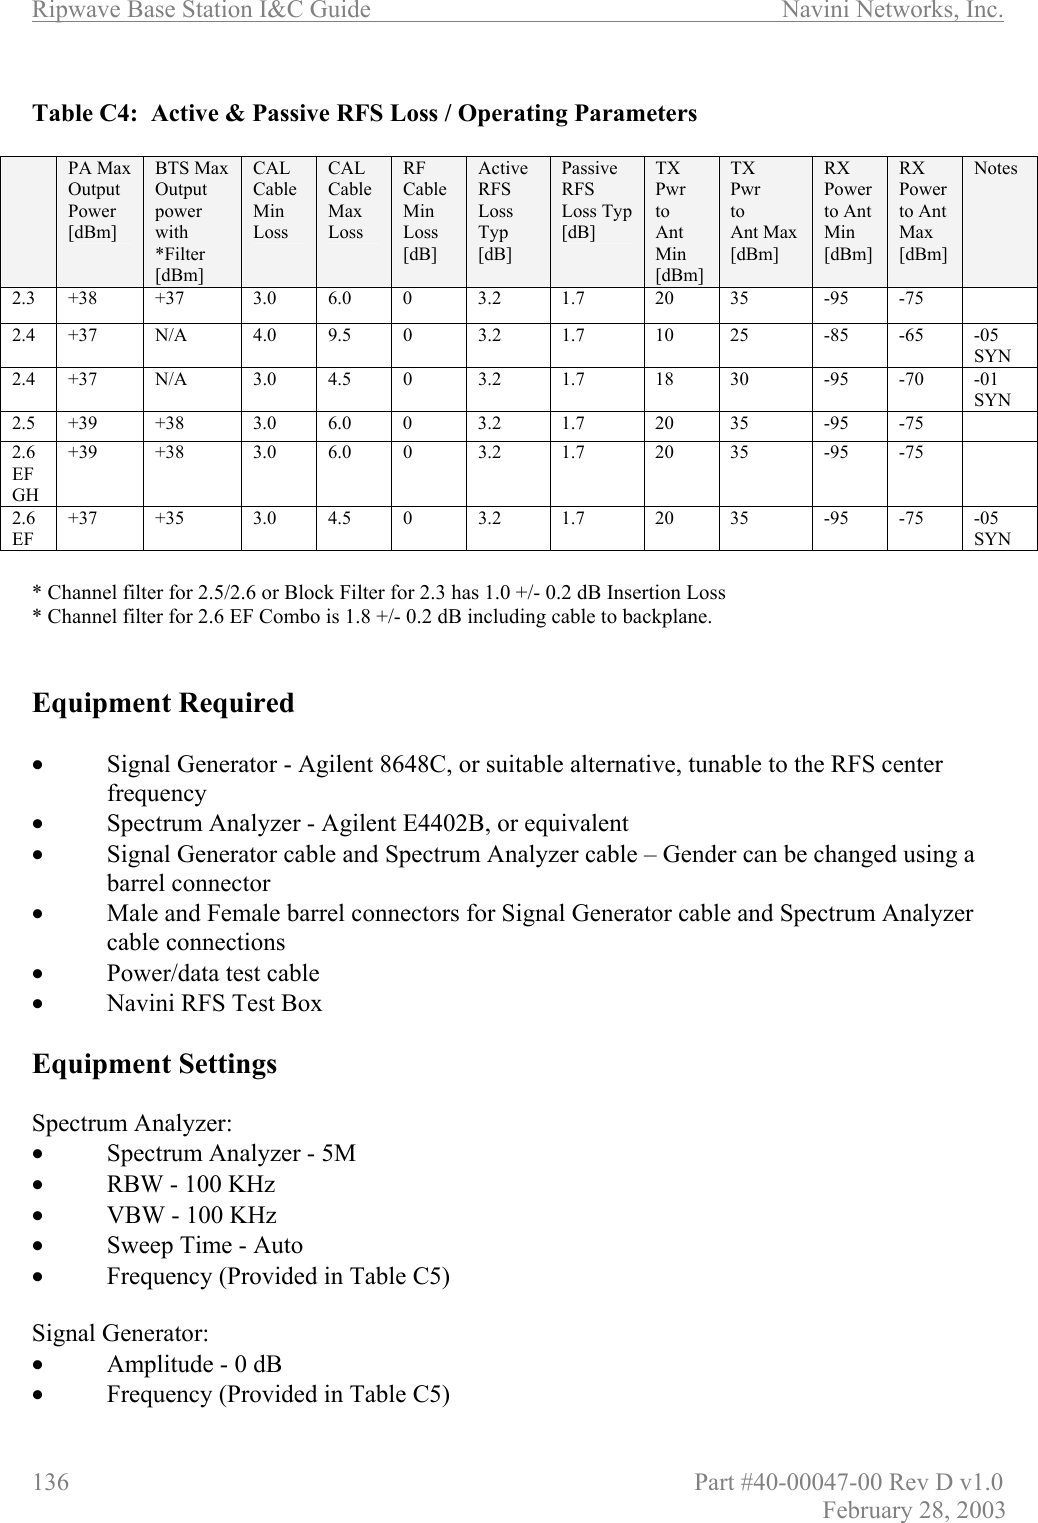 Ripwave Base Station I&amp;C Guide                      Navini Networks, Inc. 136                          Part #40-00047-00 Rev D v1.0 February 28, 2003  Table C4:  Active &amp; Passive RFS Loss / Operating Parameters   PA Max  Output  Power [dBm] BTS Max Output power with *Filter  [dBm] CAL Cable  Min Loss CAL Cable  Max Loss RF Cable Min Loss [dB] Active RFS Loss Typ [dB] Passive RFS Loss Typ [dB] TX  Pwr to  Ant  Min  [dBm] TX Pwr  to  Ant Max [dBm] RX Power to Ant Min [dBm] RX Power  to Ant Max [dBm] Notes 2.3   +38   +37   3.0  6.0  0  3.2  1.7  20  35  -95  -75   2.4 +37  N/A  4.0 9.5 0  3.2  1.7  10  25  -85 -65 -05 SYN  2.4 +37  N/A  3.0 4.5 0  3.2  1.7  18  30  -95 -70 -01 SYN 2.5  +39   +38   3.0  6.0  0  3.2  1.7  20  35  -95  -75   2.6 EFGH +39   +38   3.0  6.0  0  3.2  1.7  20  35  -95  -75   2.6 EF +37  +35   3.0 4.5 0  3.2  1.7  20  35  -95 -75 -05 SYN  * Channel filter for 2.5/2.6 or Block Filter for 2.3 has 1.0 +/- 0.2 dB Insertion Loss * Channel filter for 2.6 EF Combo is 1.8 +/- 0.2 dB including cable to backplane.     Equipment Required  •  Signal Generator - Agilent 8648C, or suitable alternative, tunable to the RFS center frequency •  Spectrum Analyzer - Agilent E4402B, or equivalent •  Signal Generator cable and Spectrum Analyzer cable – Gender can be changed using a barrel connector •  Male and Female barrel connectors for Signal Generator cable and Spectrum Analyzer cable connections •  Power/data test cable •  Navini RFS Test Box  Equipment Settings  Spectrum Analyzer: •  Spectrum Analyzer - 5M       •  RBW - 100 KHz •  VBW - 100 KHz •  Sweep Time - Auto •  Frequency (Provided in Table C5)  Signal Generator: •  Amplitude - 0 dB •  Frequency (Provided in Table C5)     